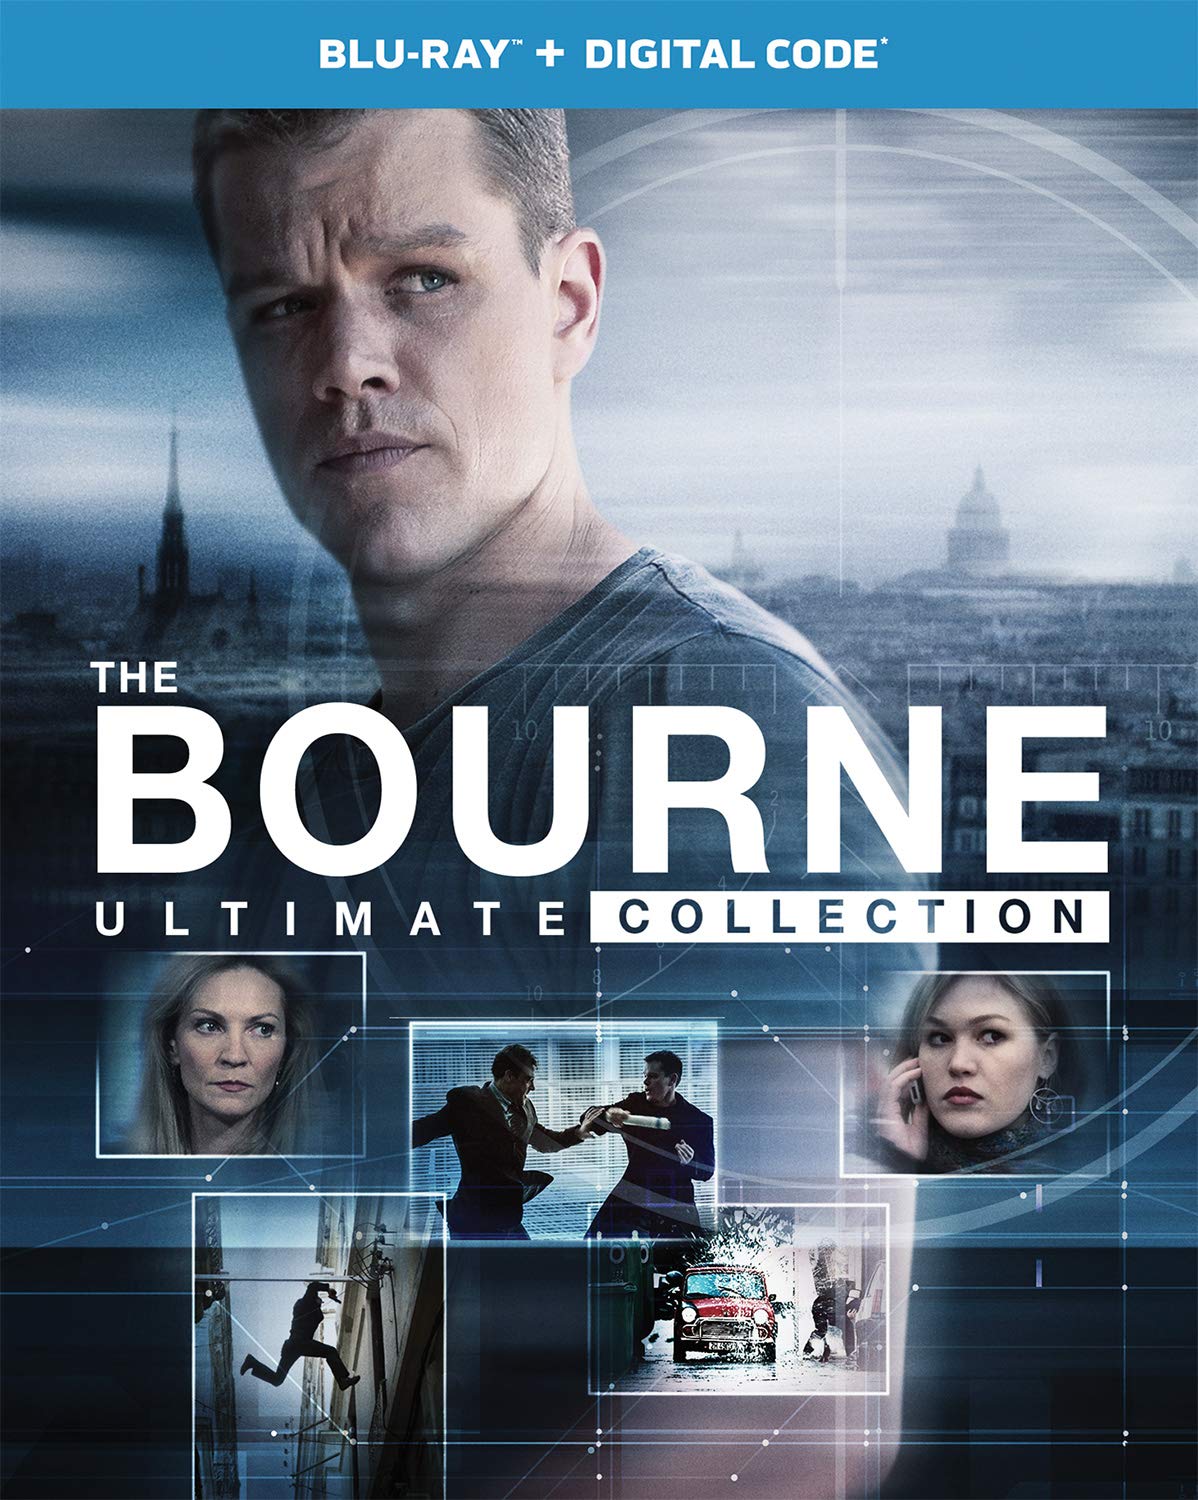 The Bourne Ultimate Collection (Blu-ray + Digital) $16.79 + Free Shipping